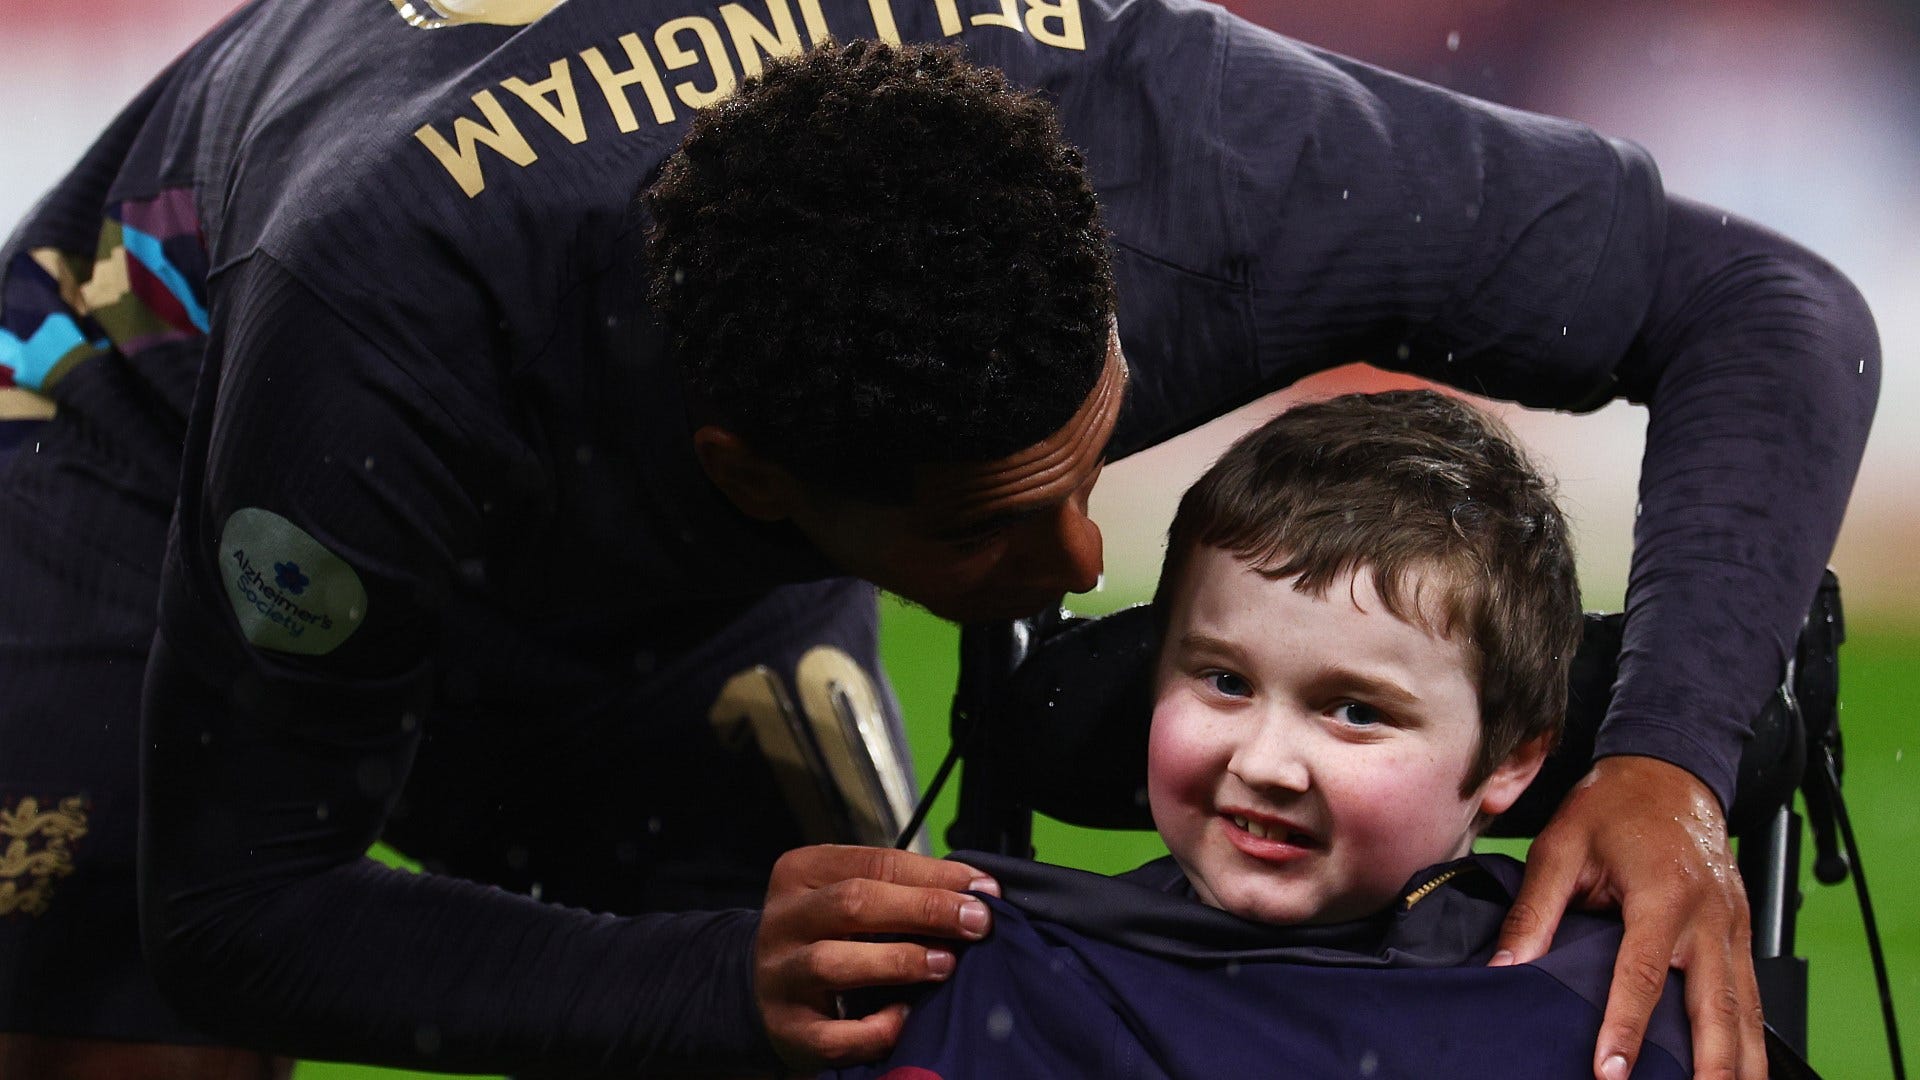 VIDEO: Jude Bellingham goes viral for heart-warming gesture as England star gives disabled mascot his tracksuit in pouring rain at Wembley